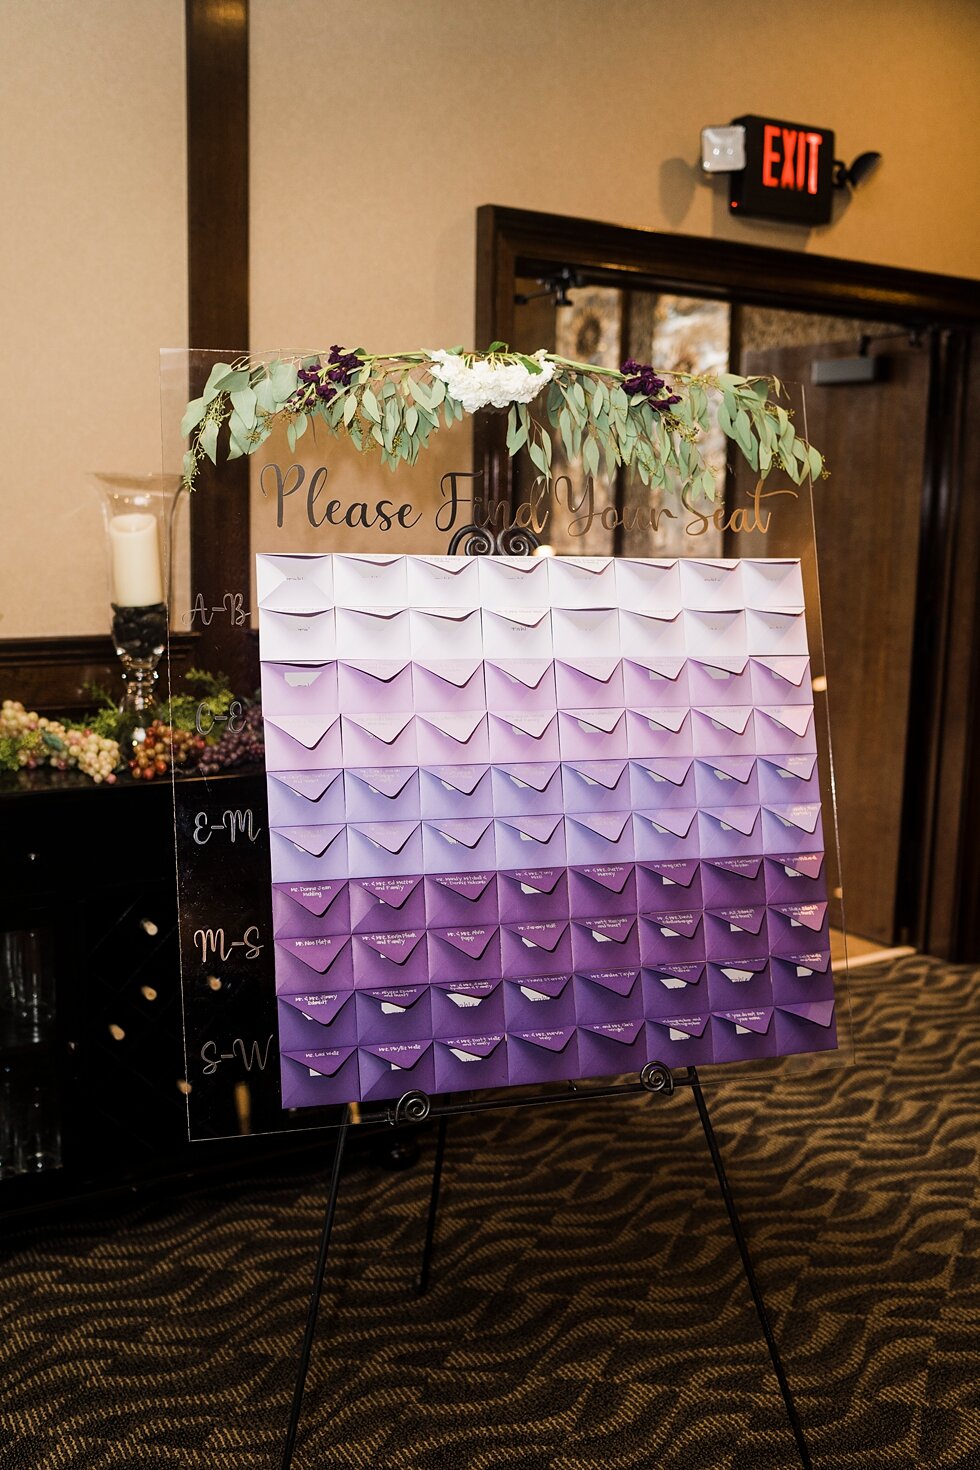  Lavender wedding envelopes for their seating chart to direct wedding guest where to sit at the reception dinner. wedding ceremony details stunning photography married midwest louisville kentucky #weddingphoto #love #justmarried #midwestphotographer 